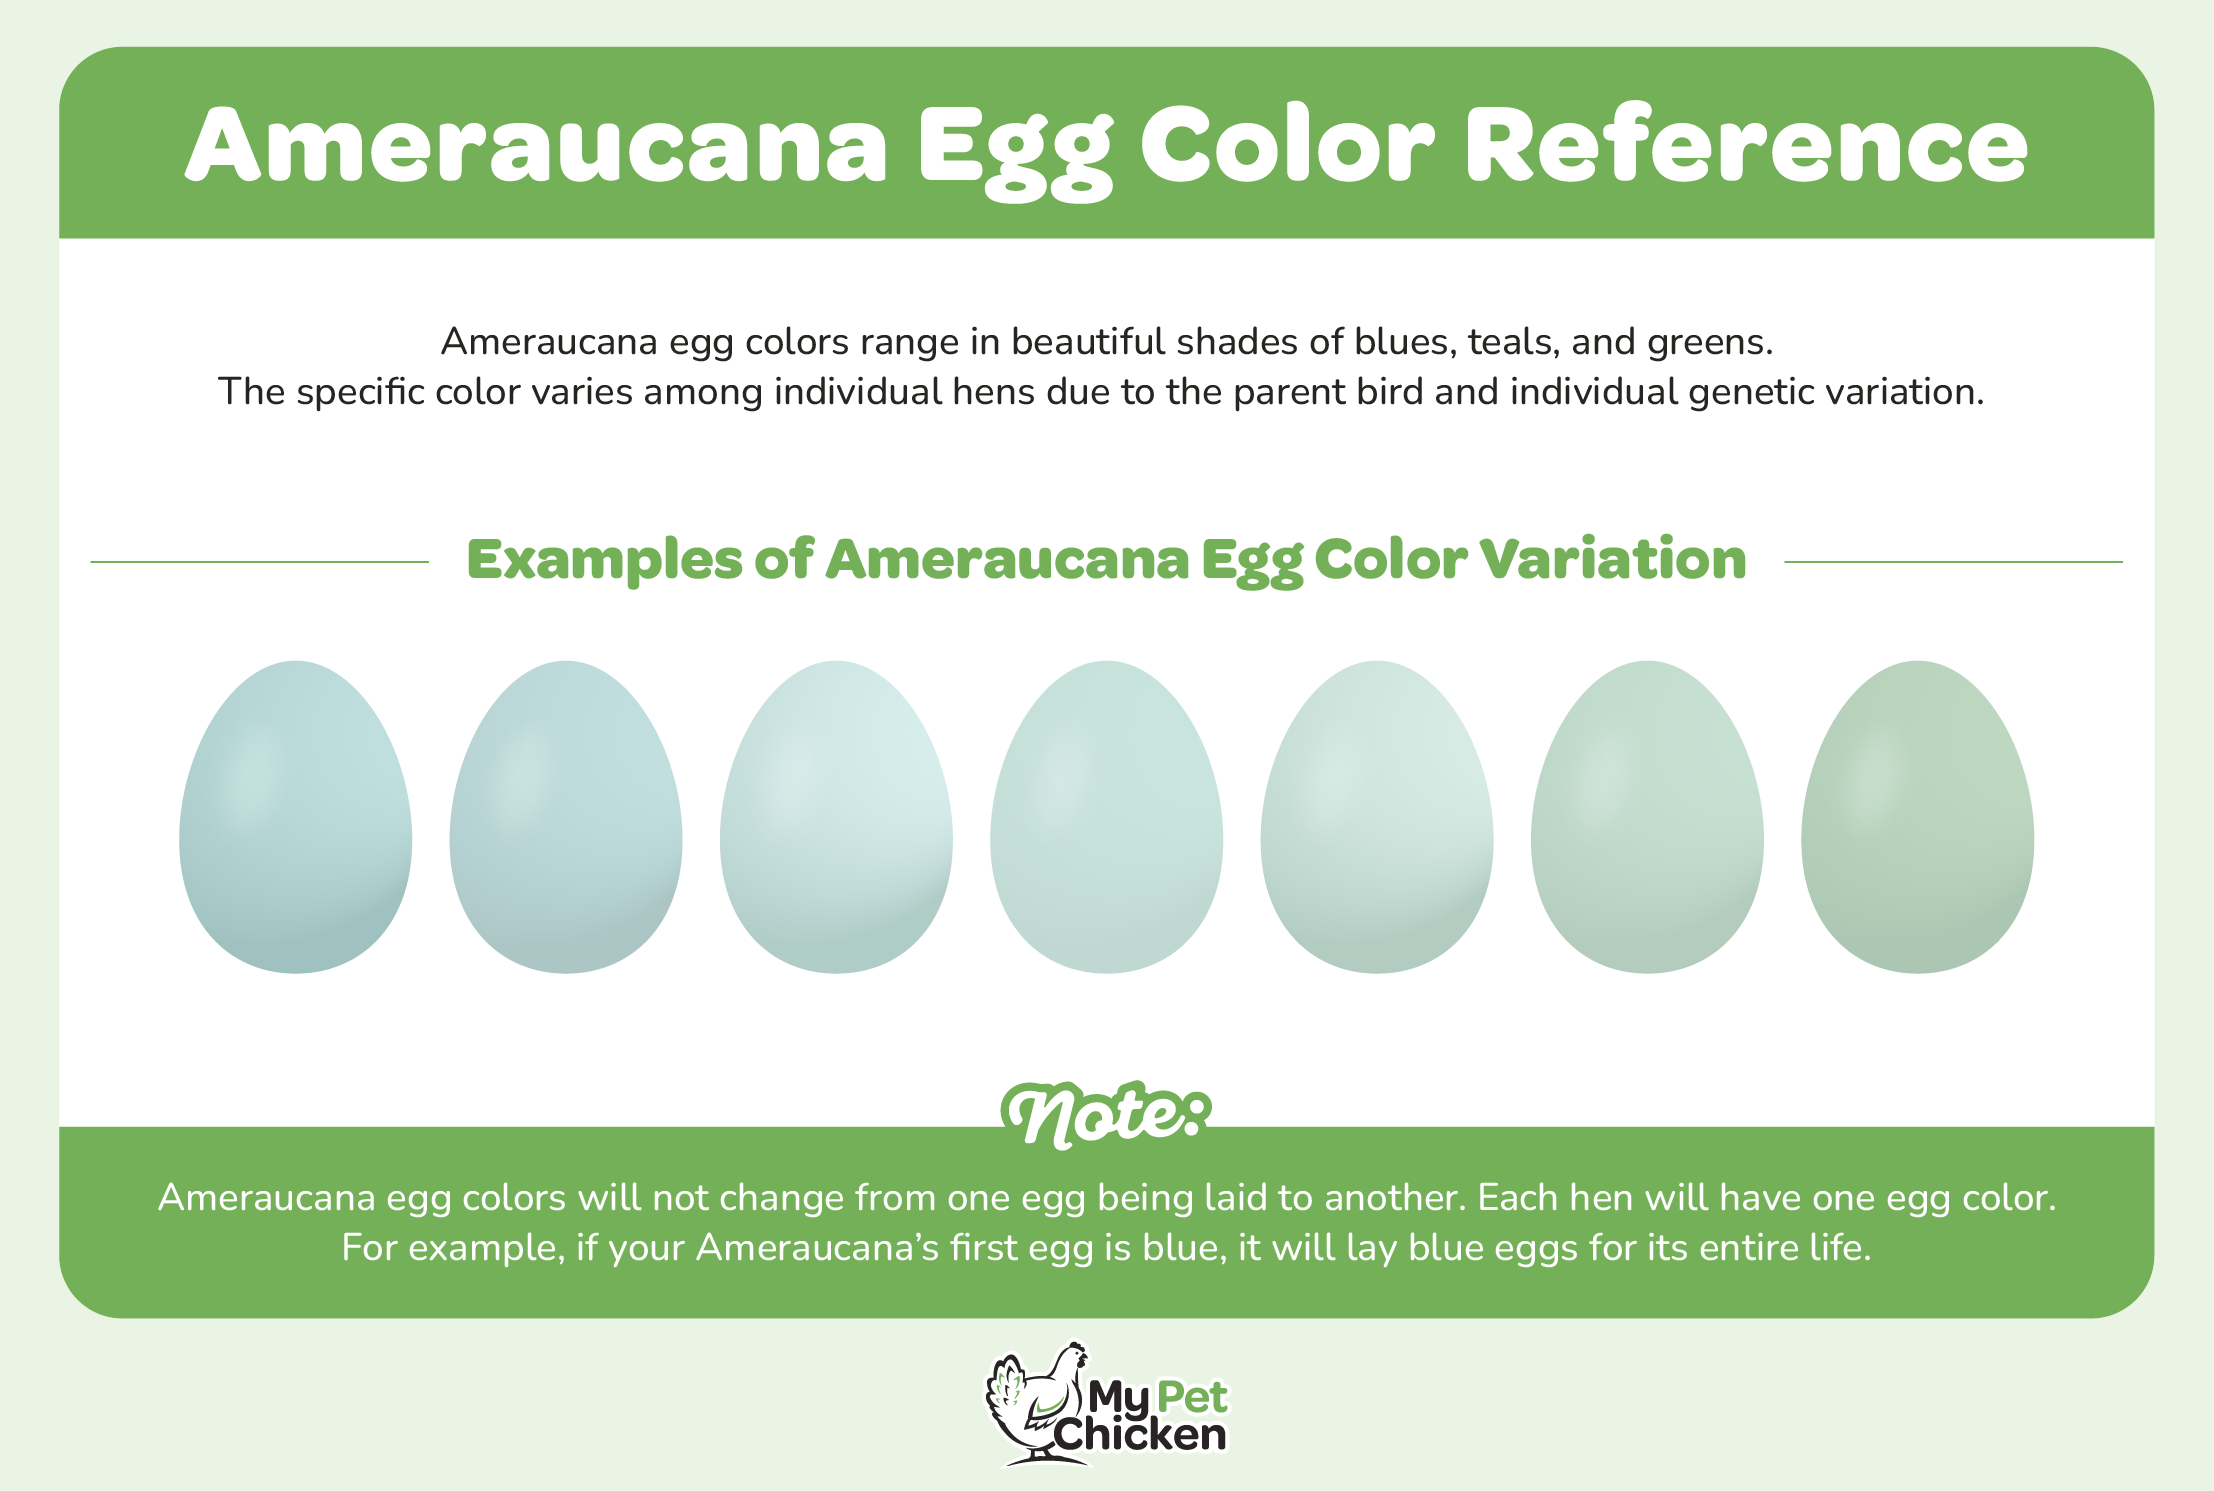 Ameraucana chickens lay a rage of blue and green eggs.